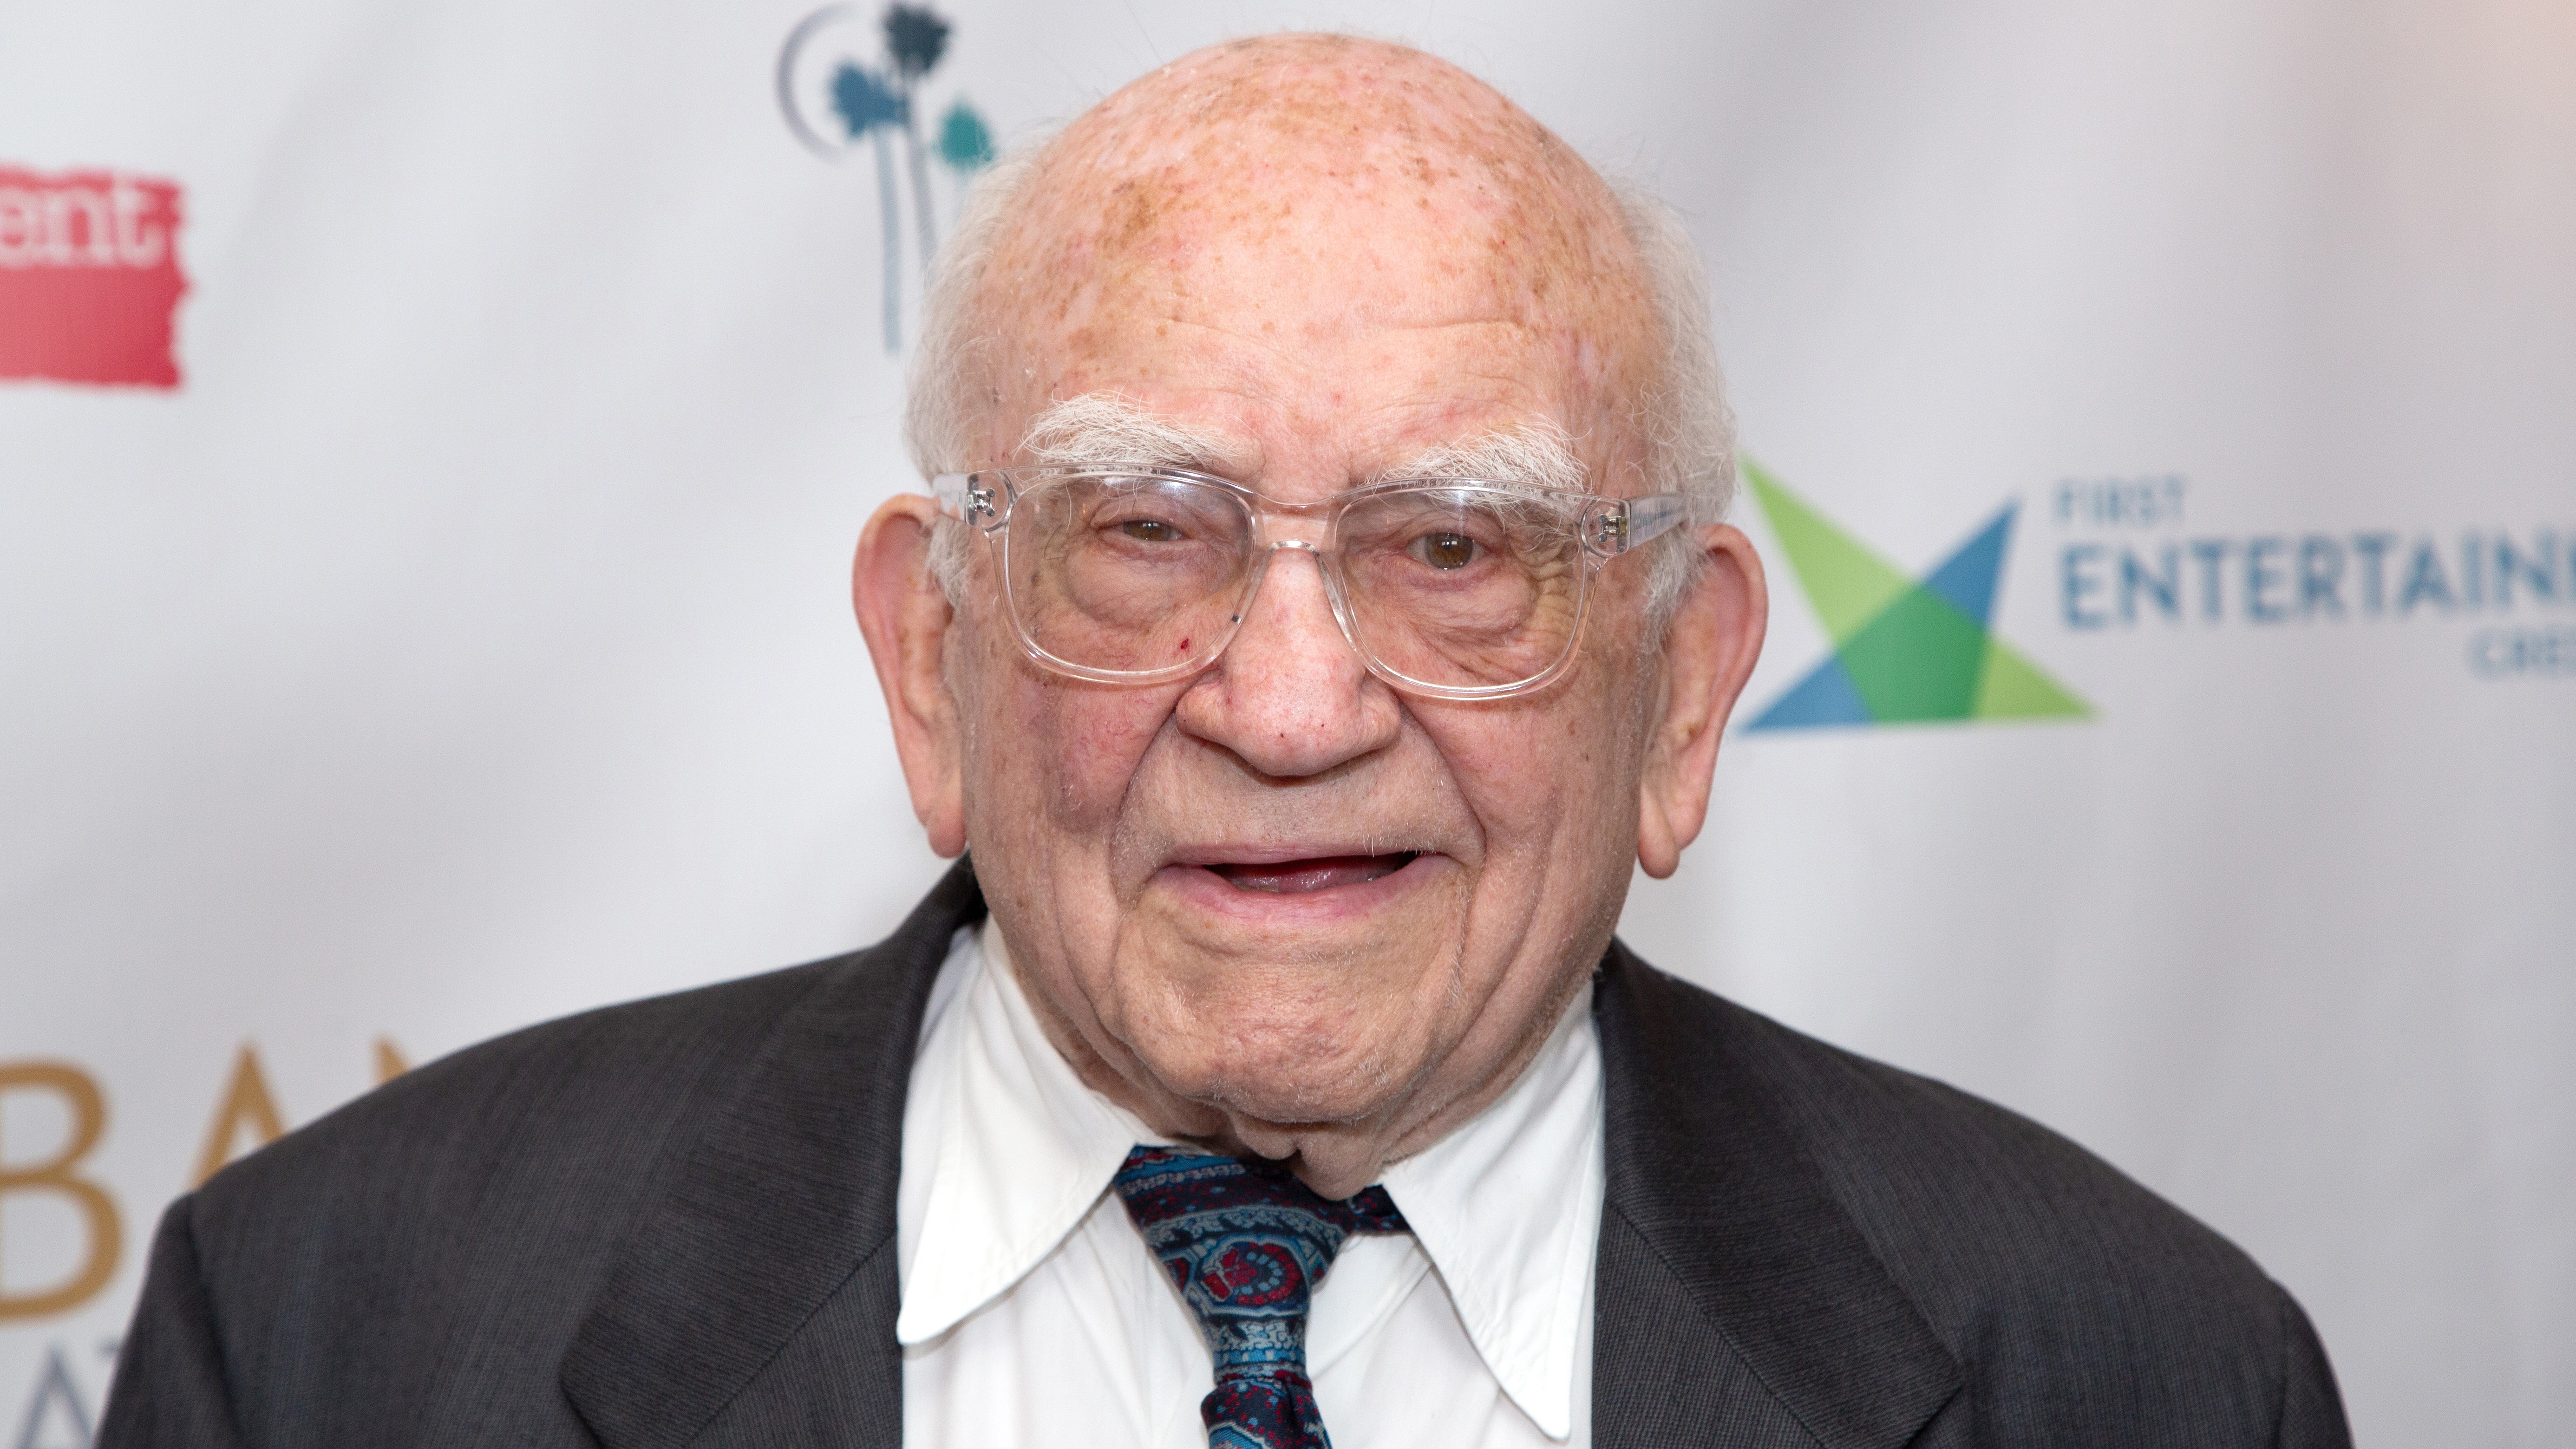 Ed Asner, actor and activist best known as Lou Grant in 'The Mary Tyler Moore Show,' dead at 91